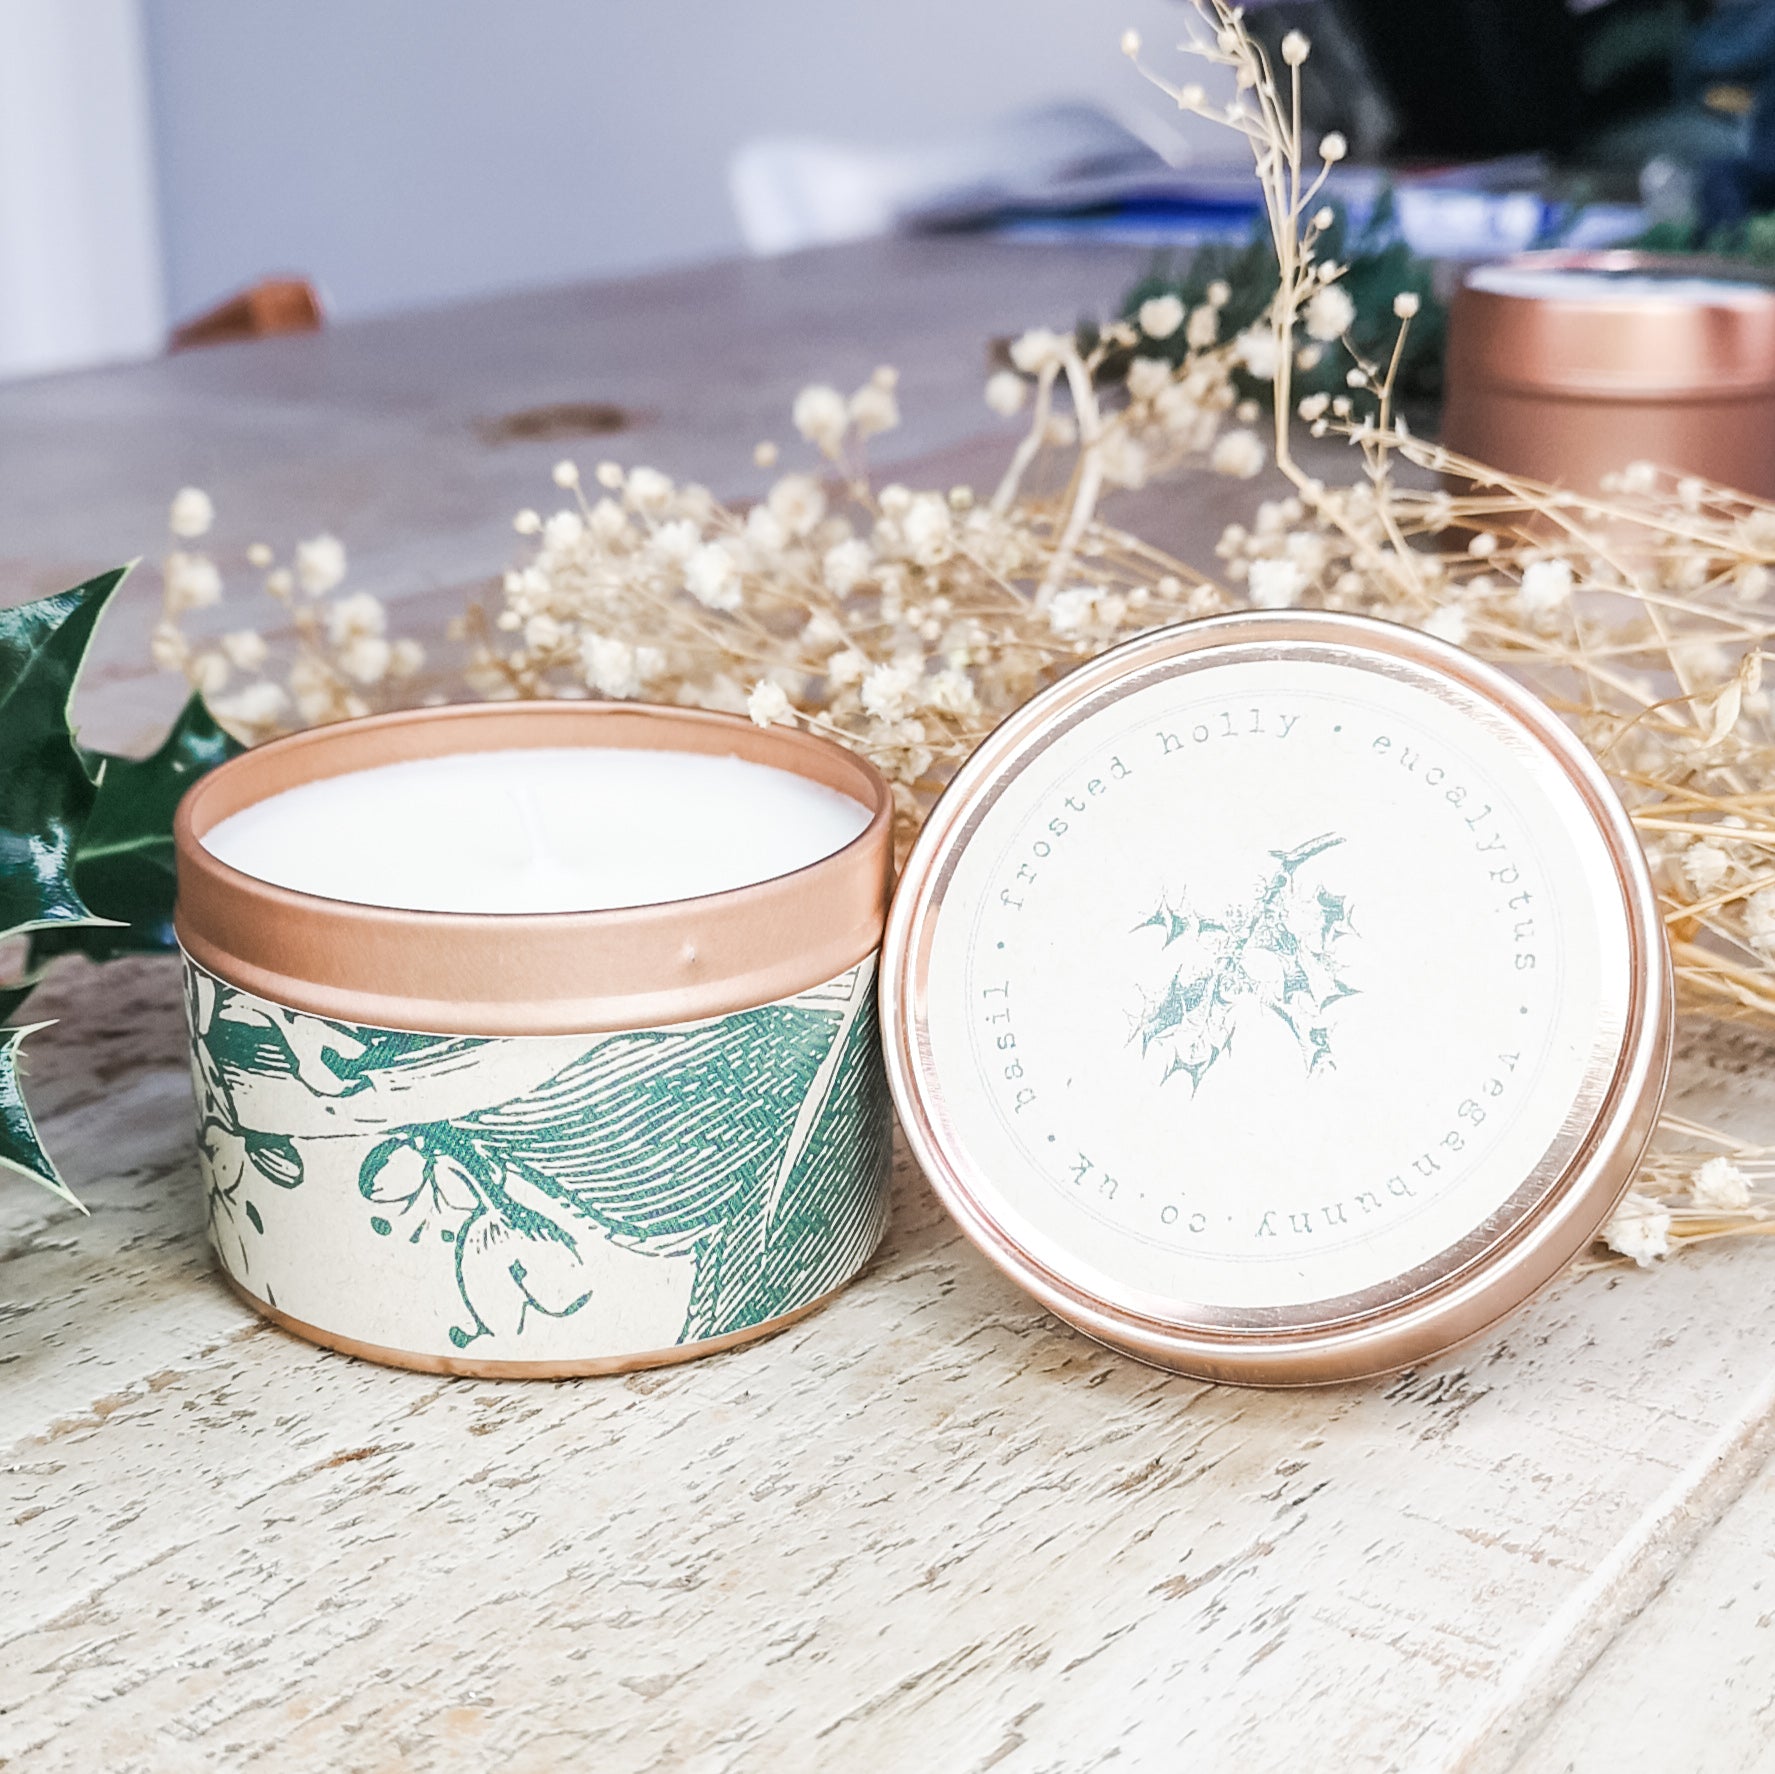 Frosted Holly Aromatherapy Candle - Buy at Out of the Box Gifts